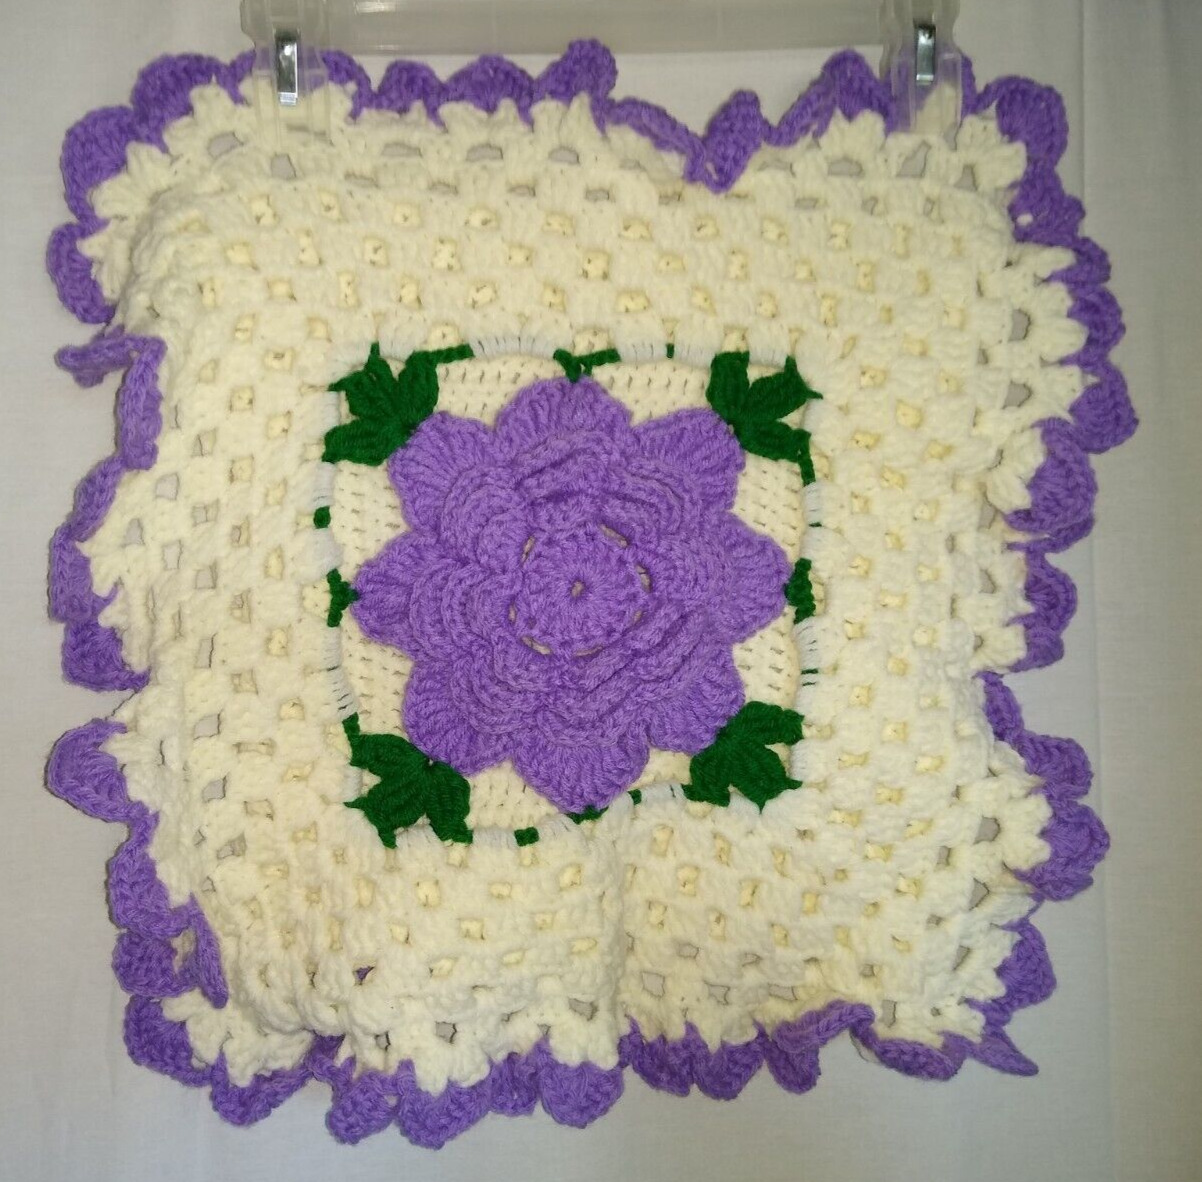 Lot Of 2 Hand Crocheted Pillow Covers Purple/Cream/Green Flower NEW Shabby Chic